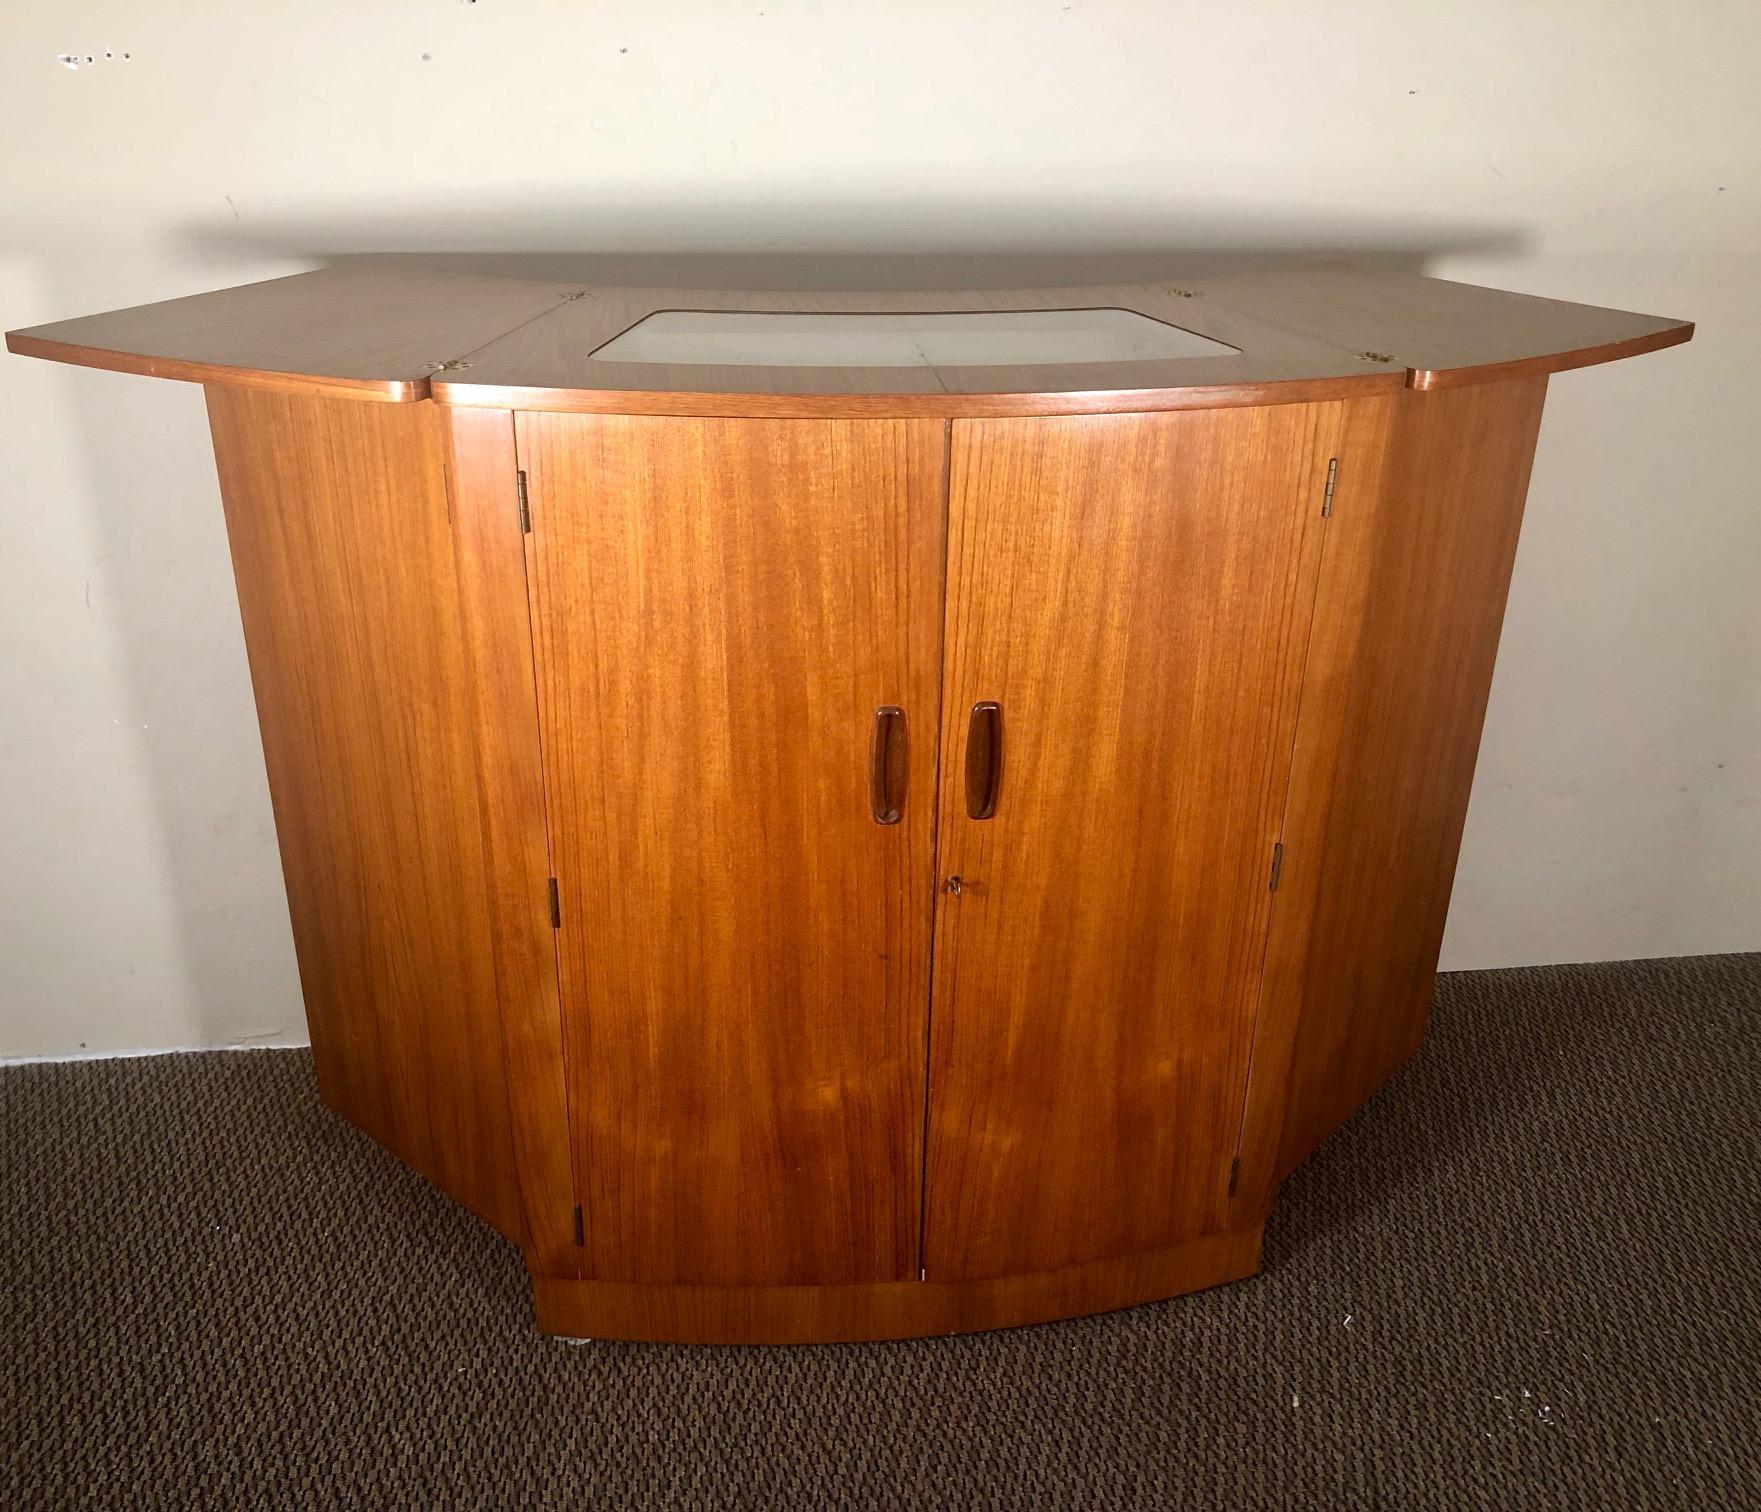 This is a gorgeous space saving midcentury teak bar by Turnidge of London. The top unfolds and the sides fold out. The bar is on wheels.
Excellent vintage condition. Some of the orignal accessories are missing. The metal clips in the doors used to